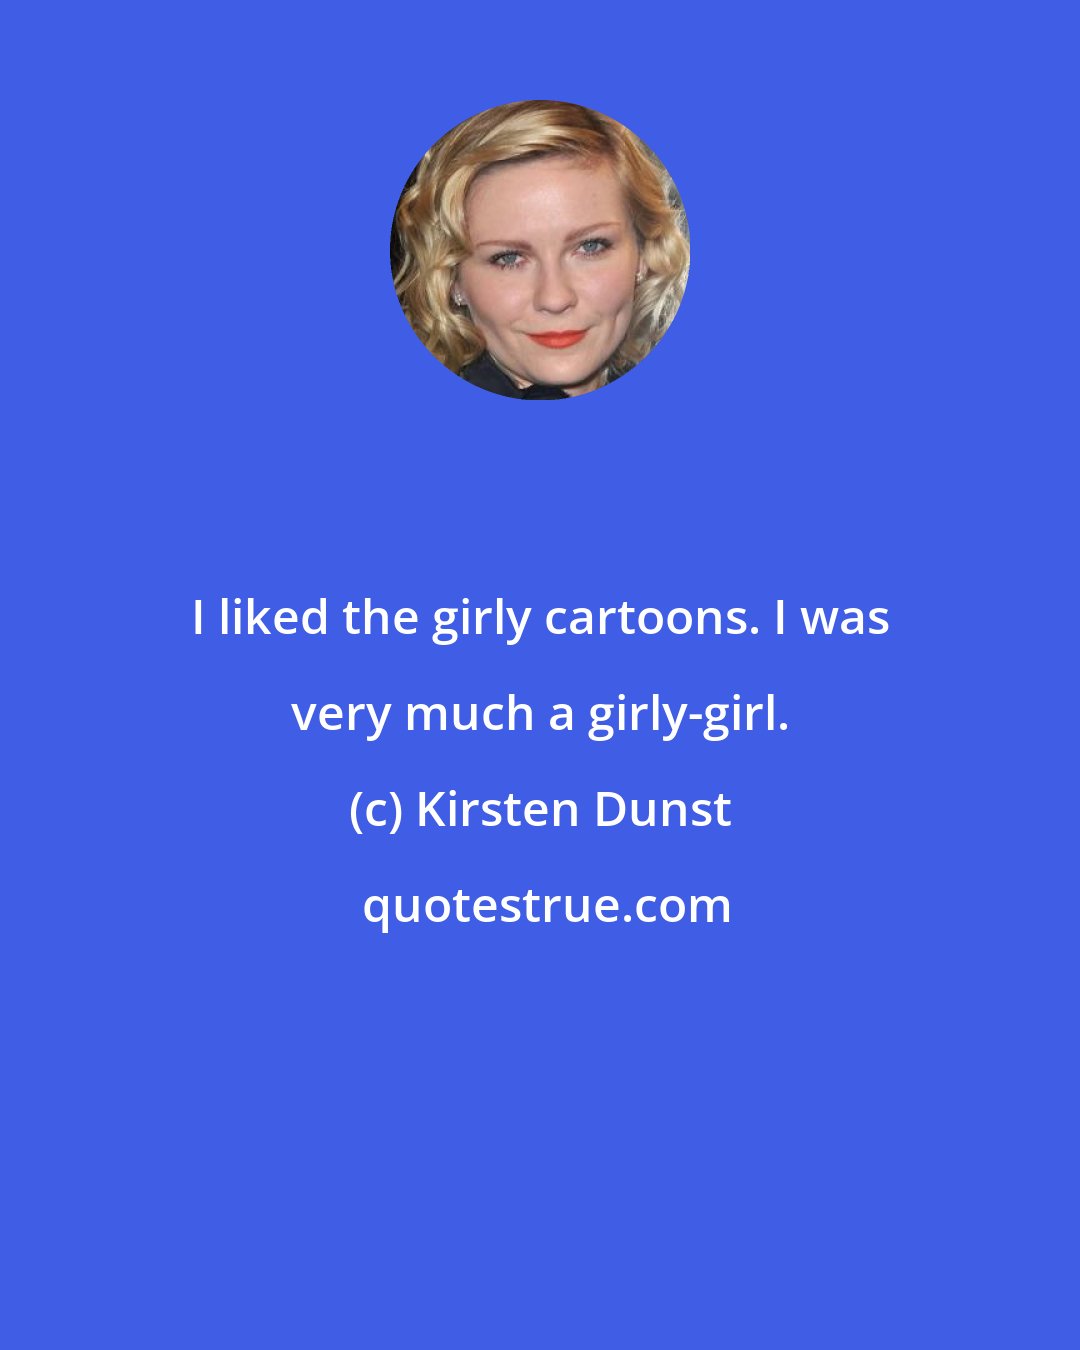 Kirsten Dunst: I liked the girly cartoons. I was very much a girly-girl.